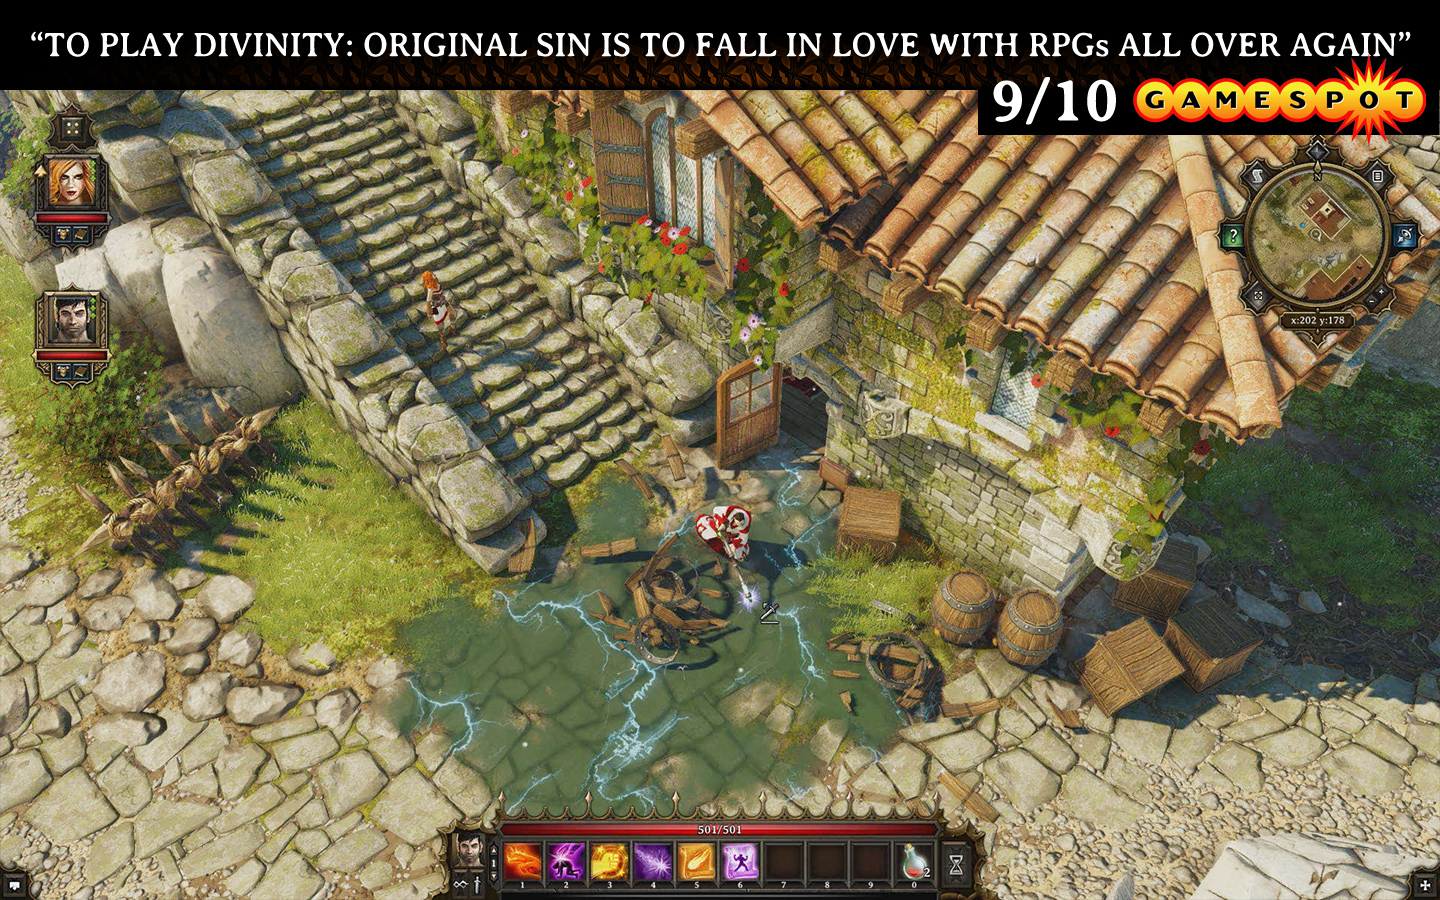 games similar to divinity